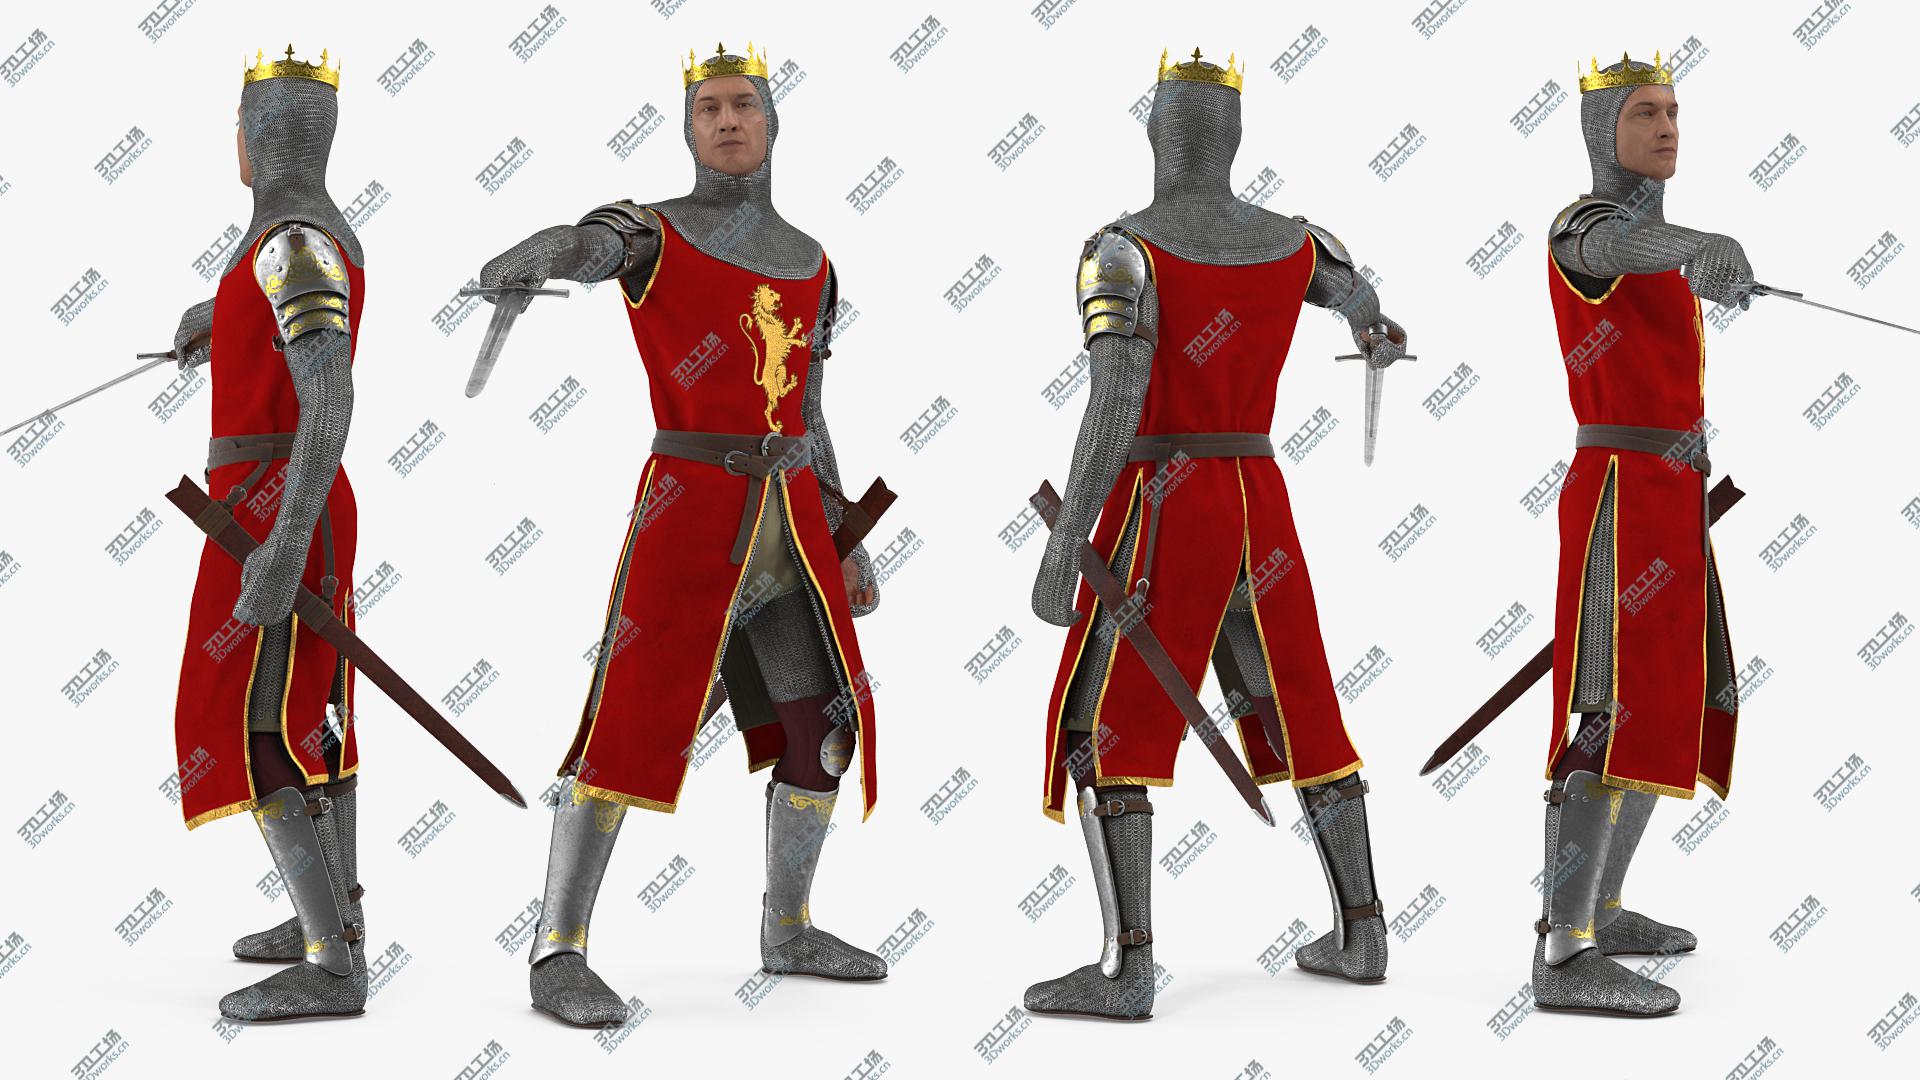 images/goods_img/202104093/Crusader Knight King with Sword 3D model/1.jpg